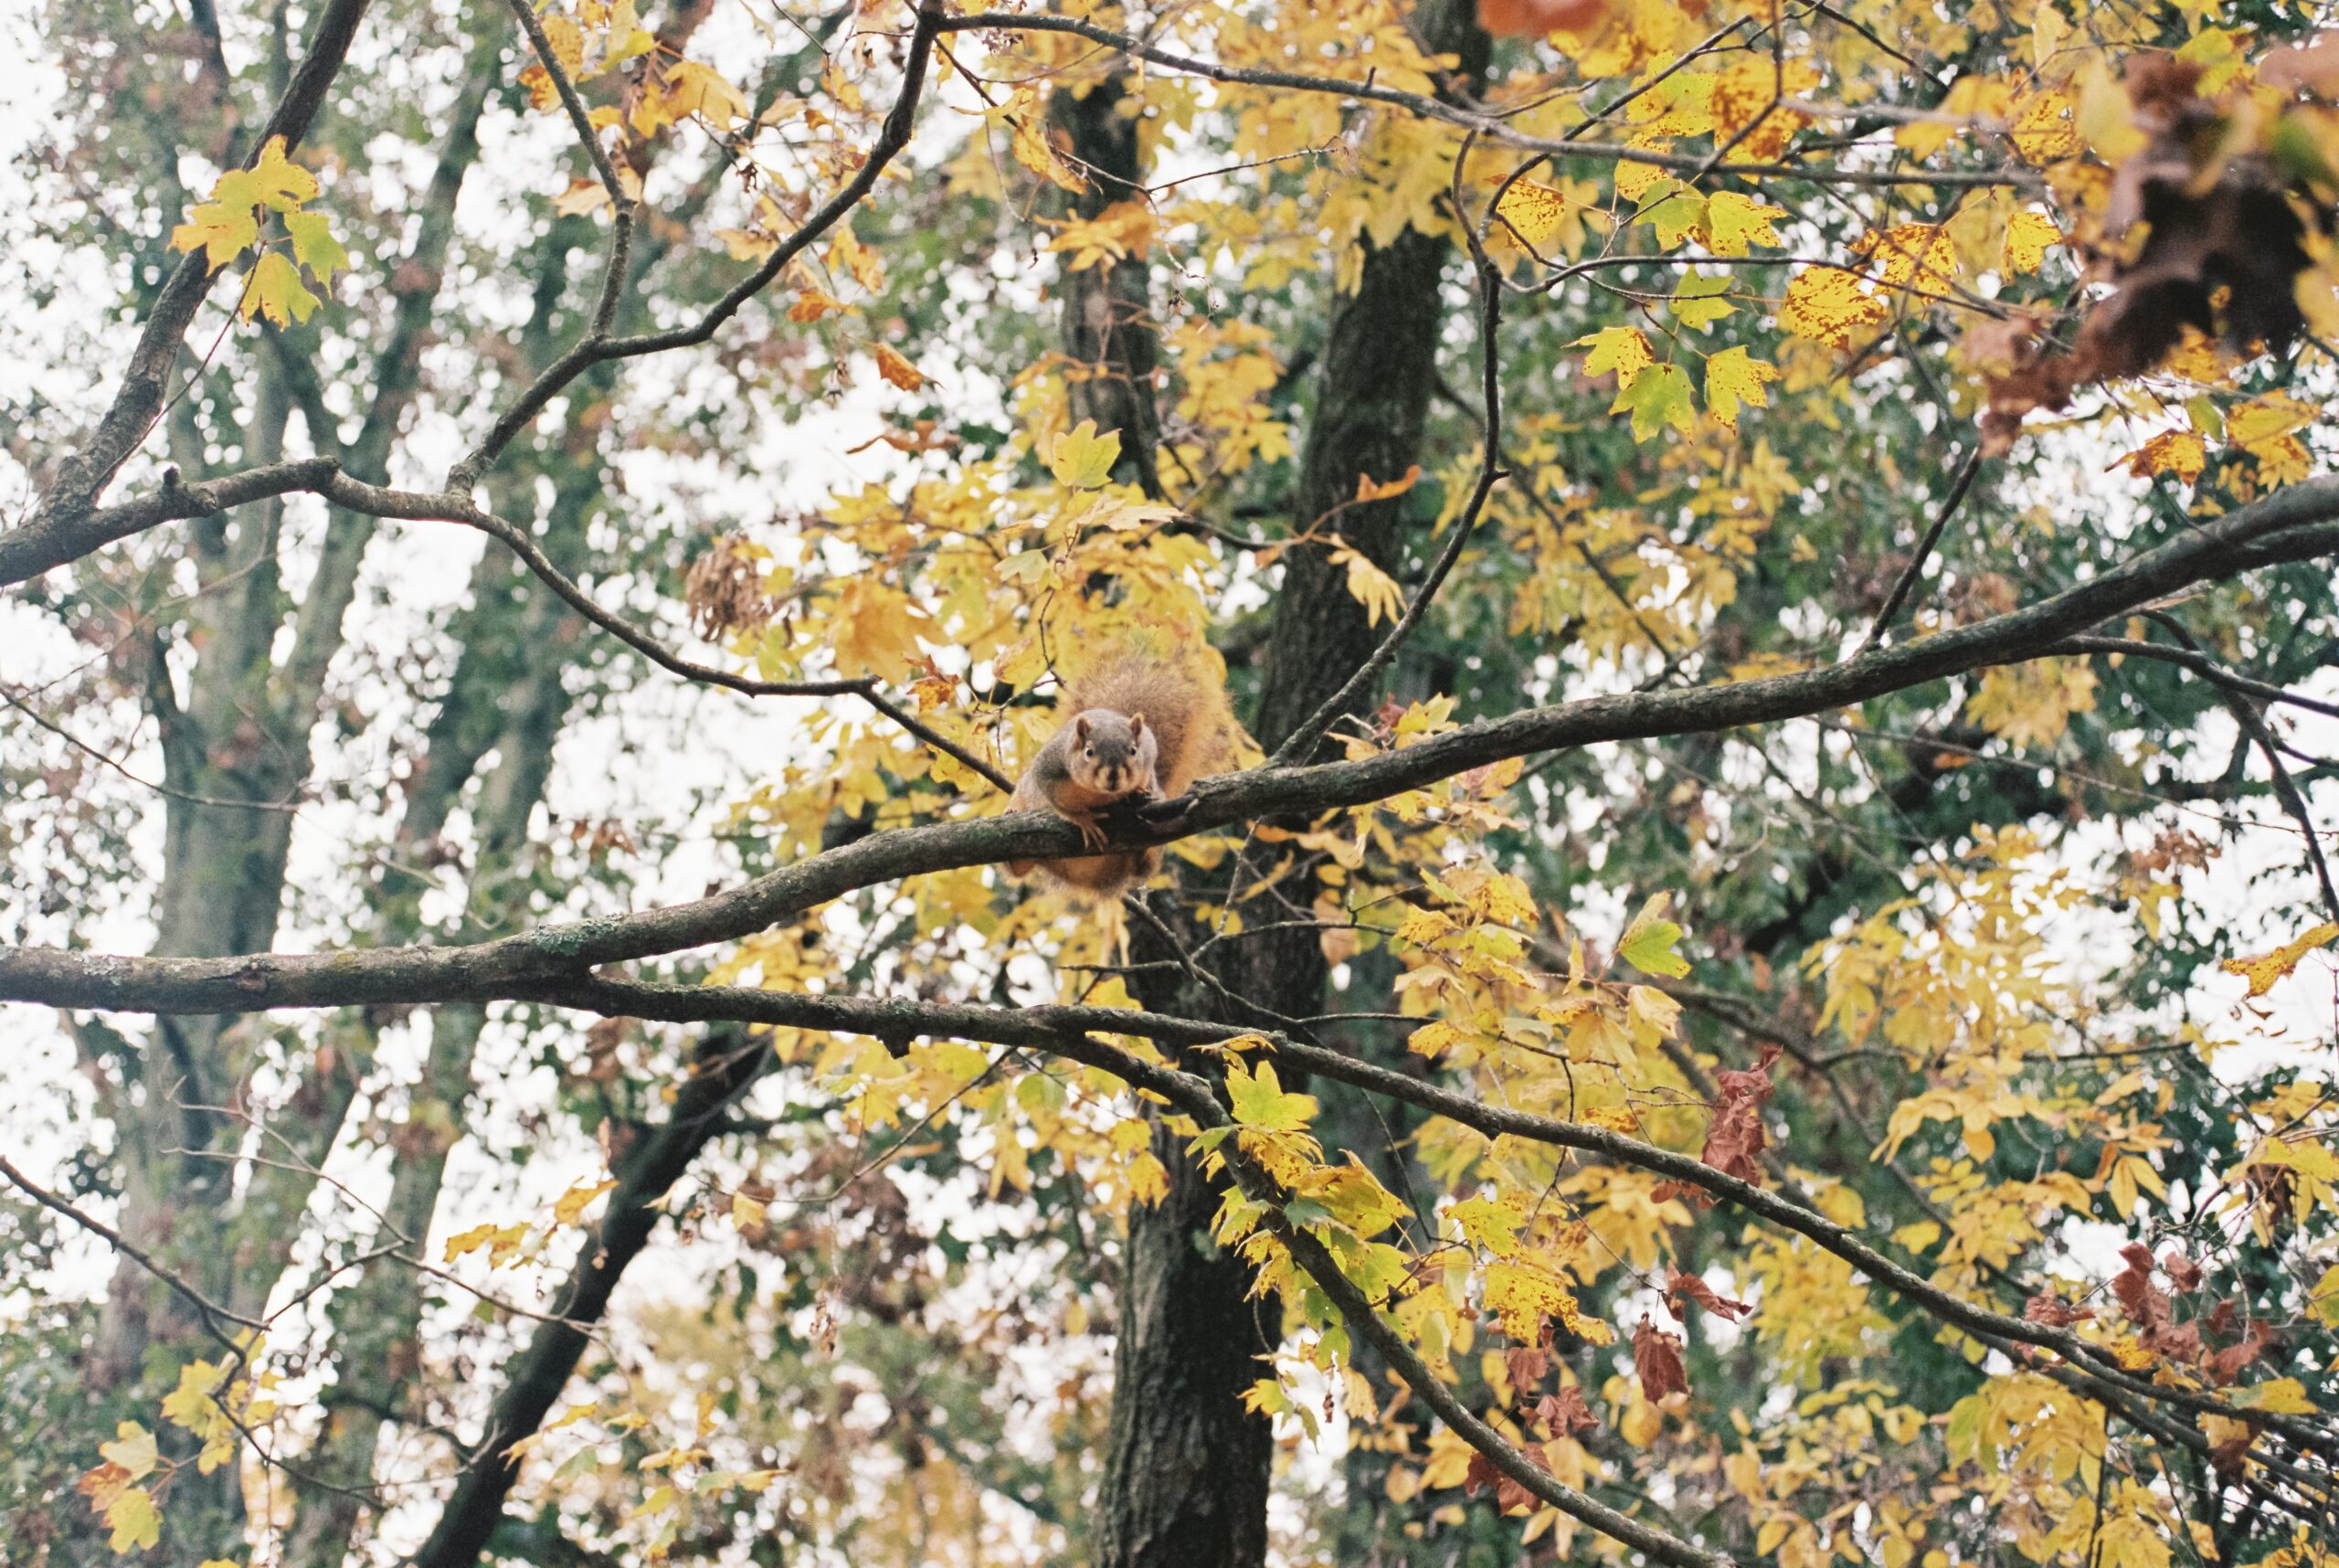 A squirrel sitting on a tree branch